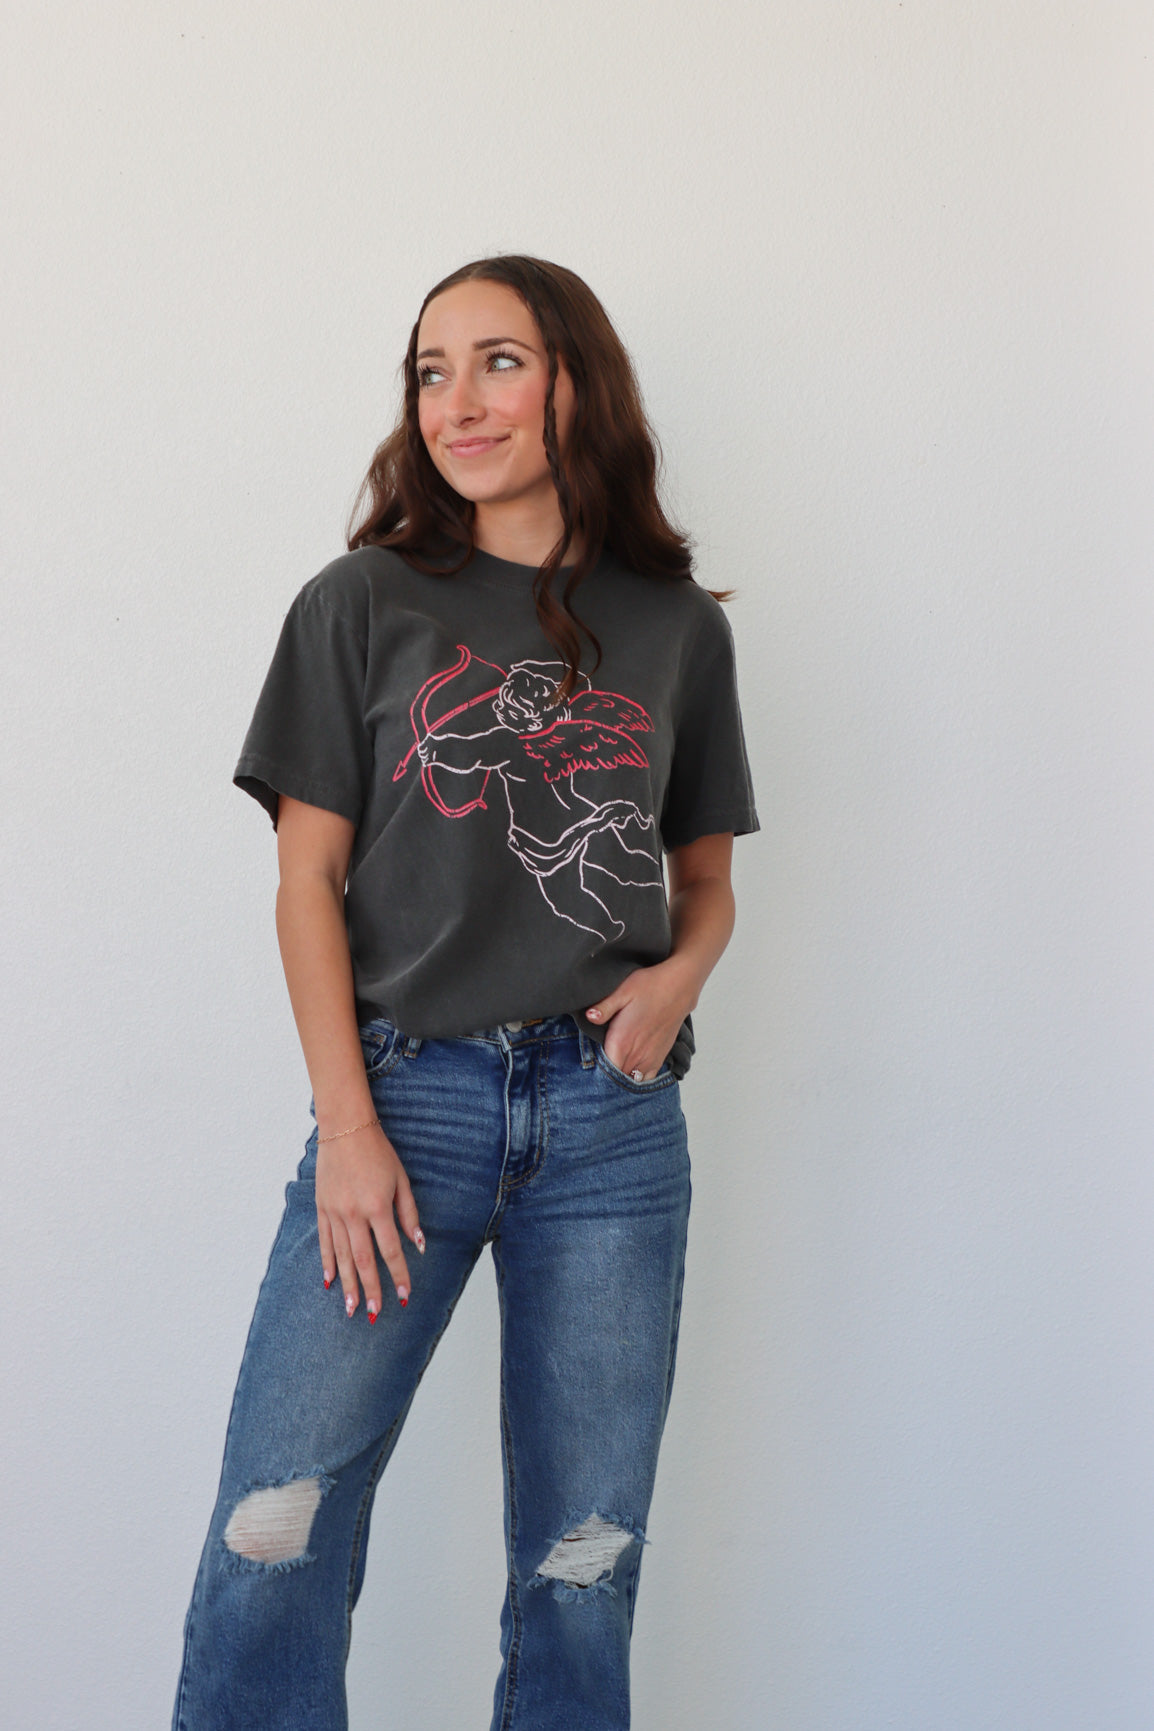 girl wearing black t-shirt with cupid graphic